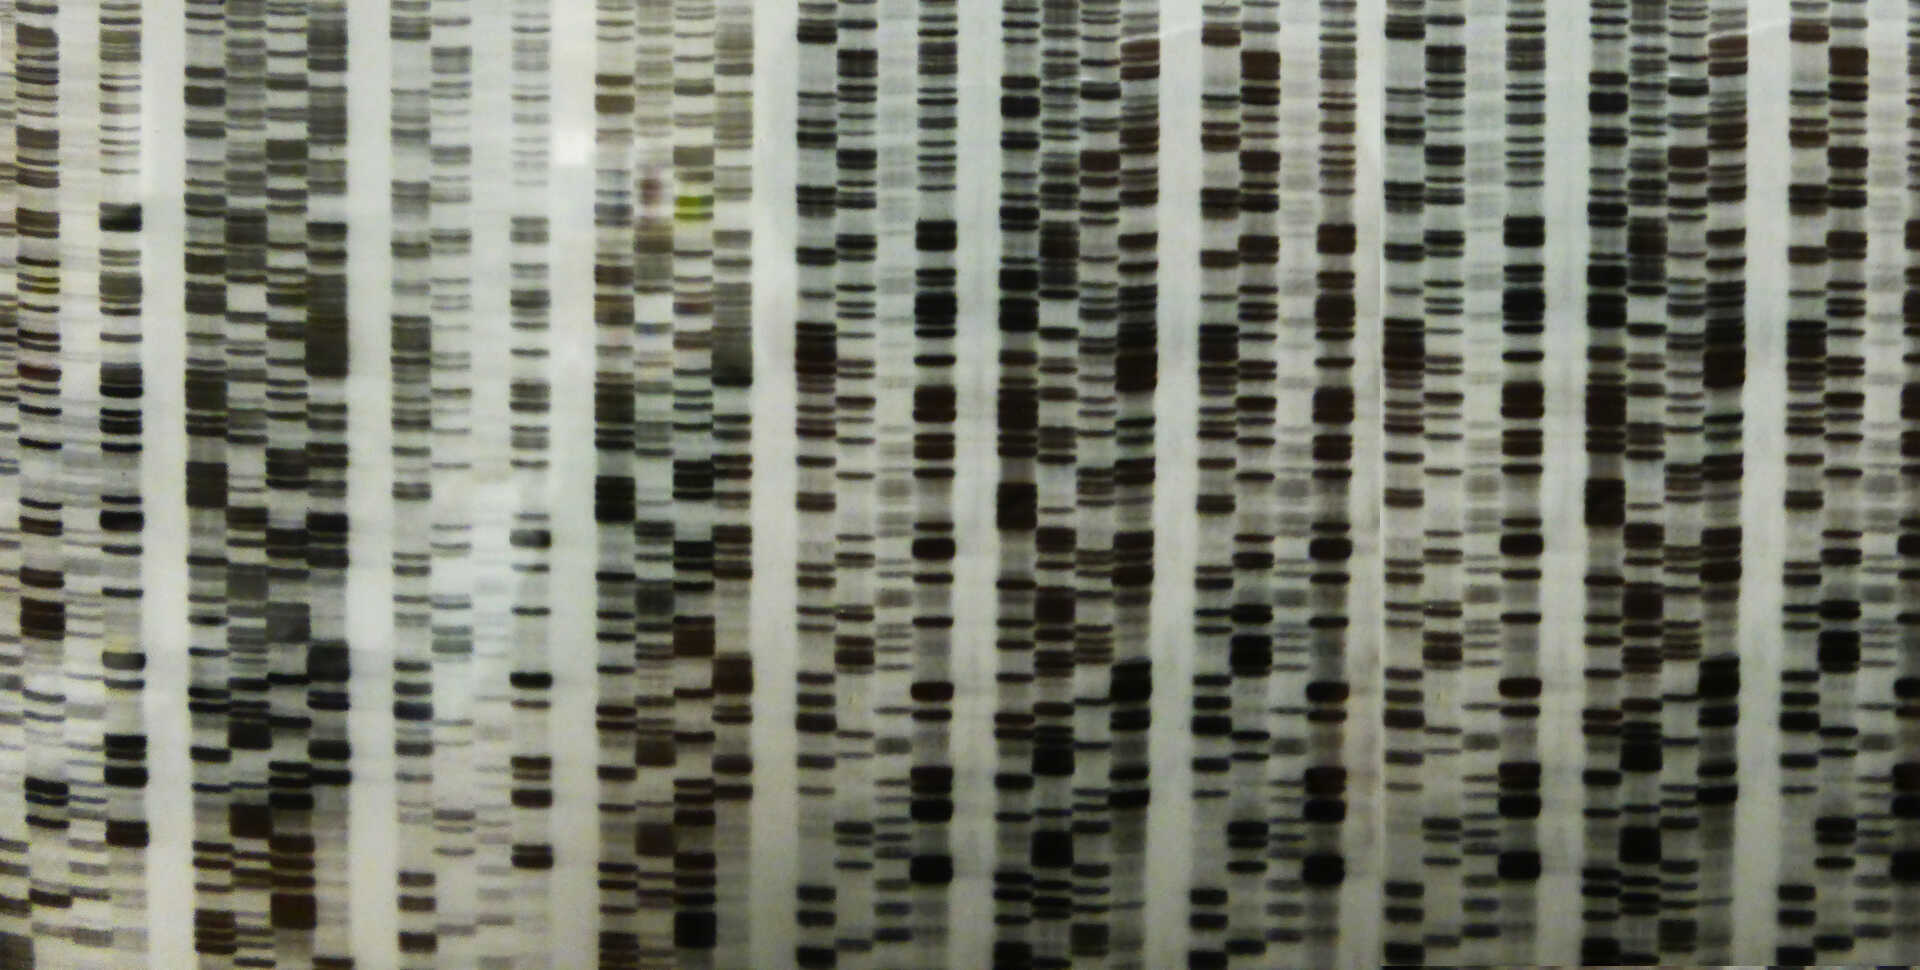 1996 Autorad from manual Sanger sequencing